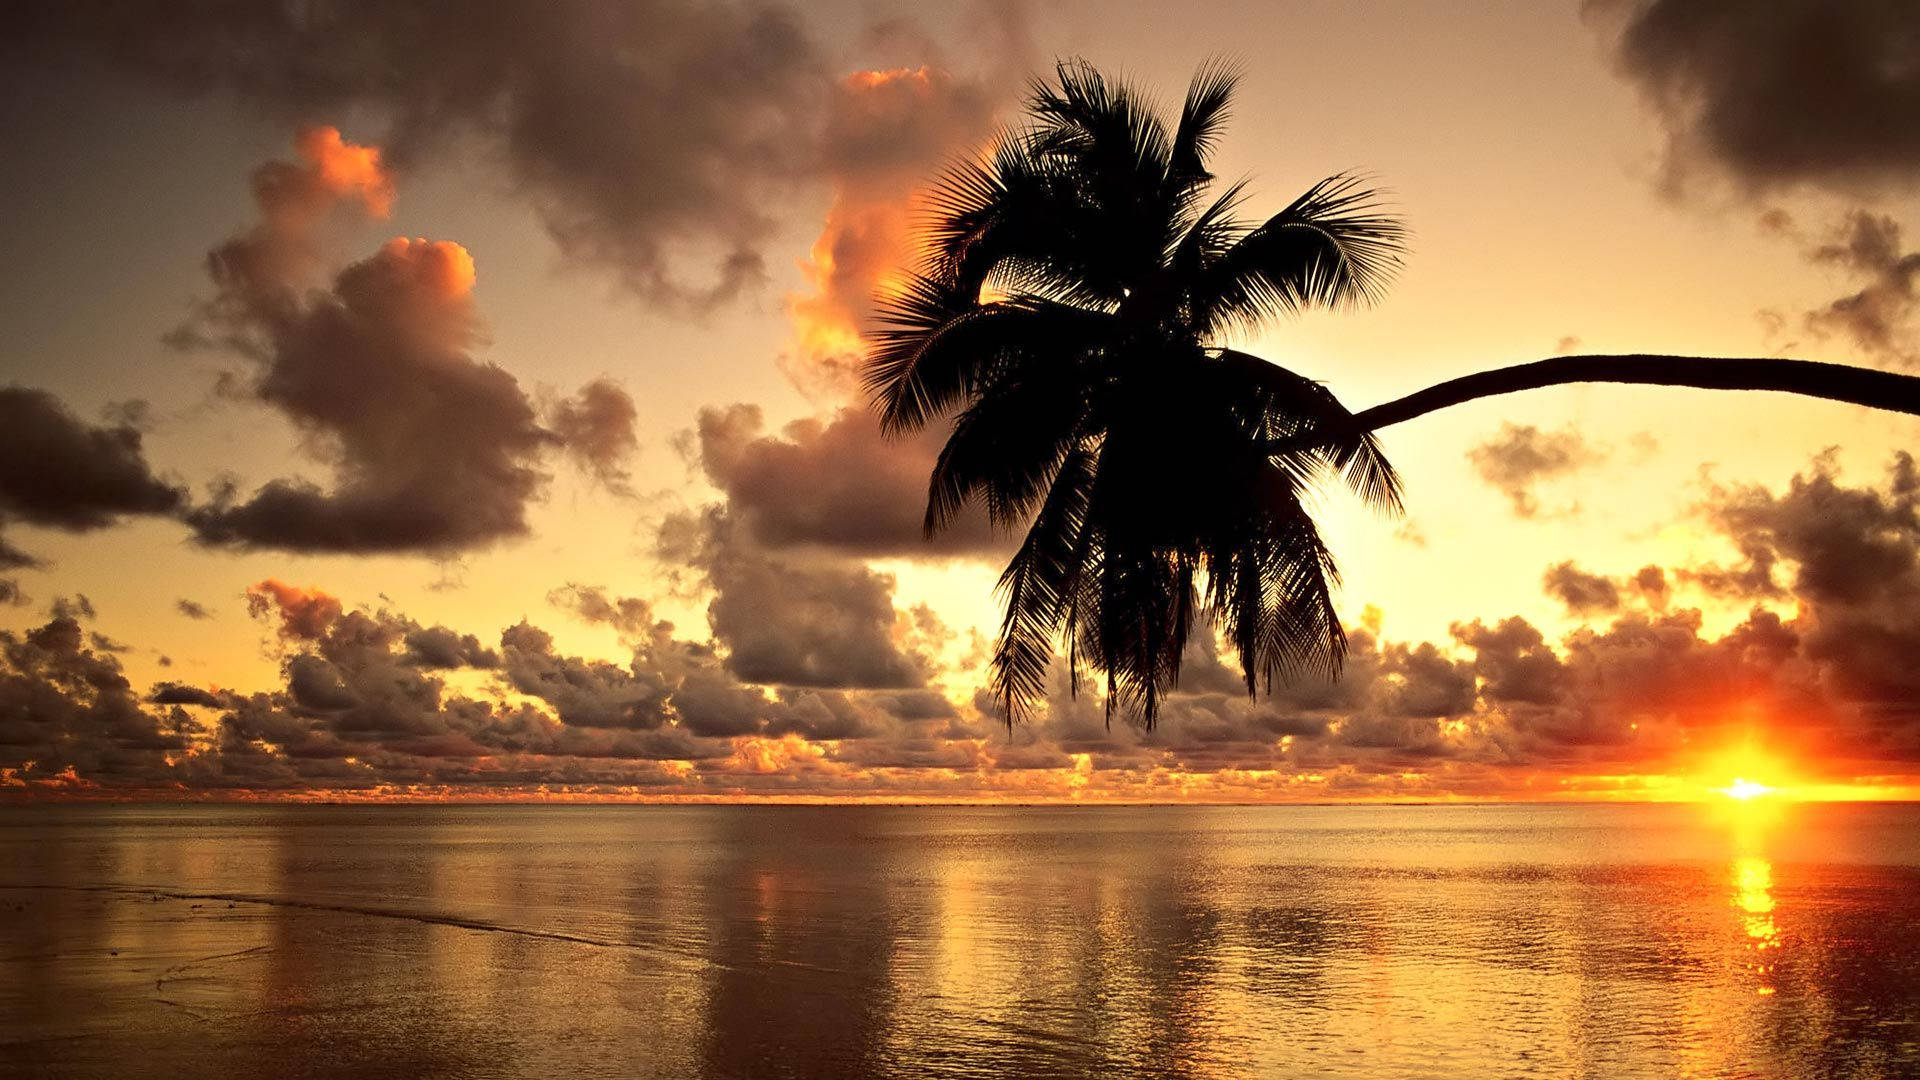 HD wallpaper of sunset at beach with silhouette of coconut tree. 